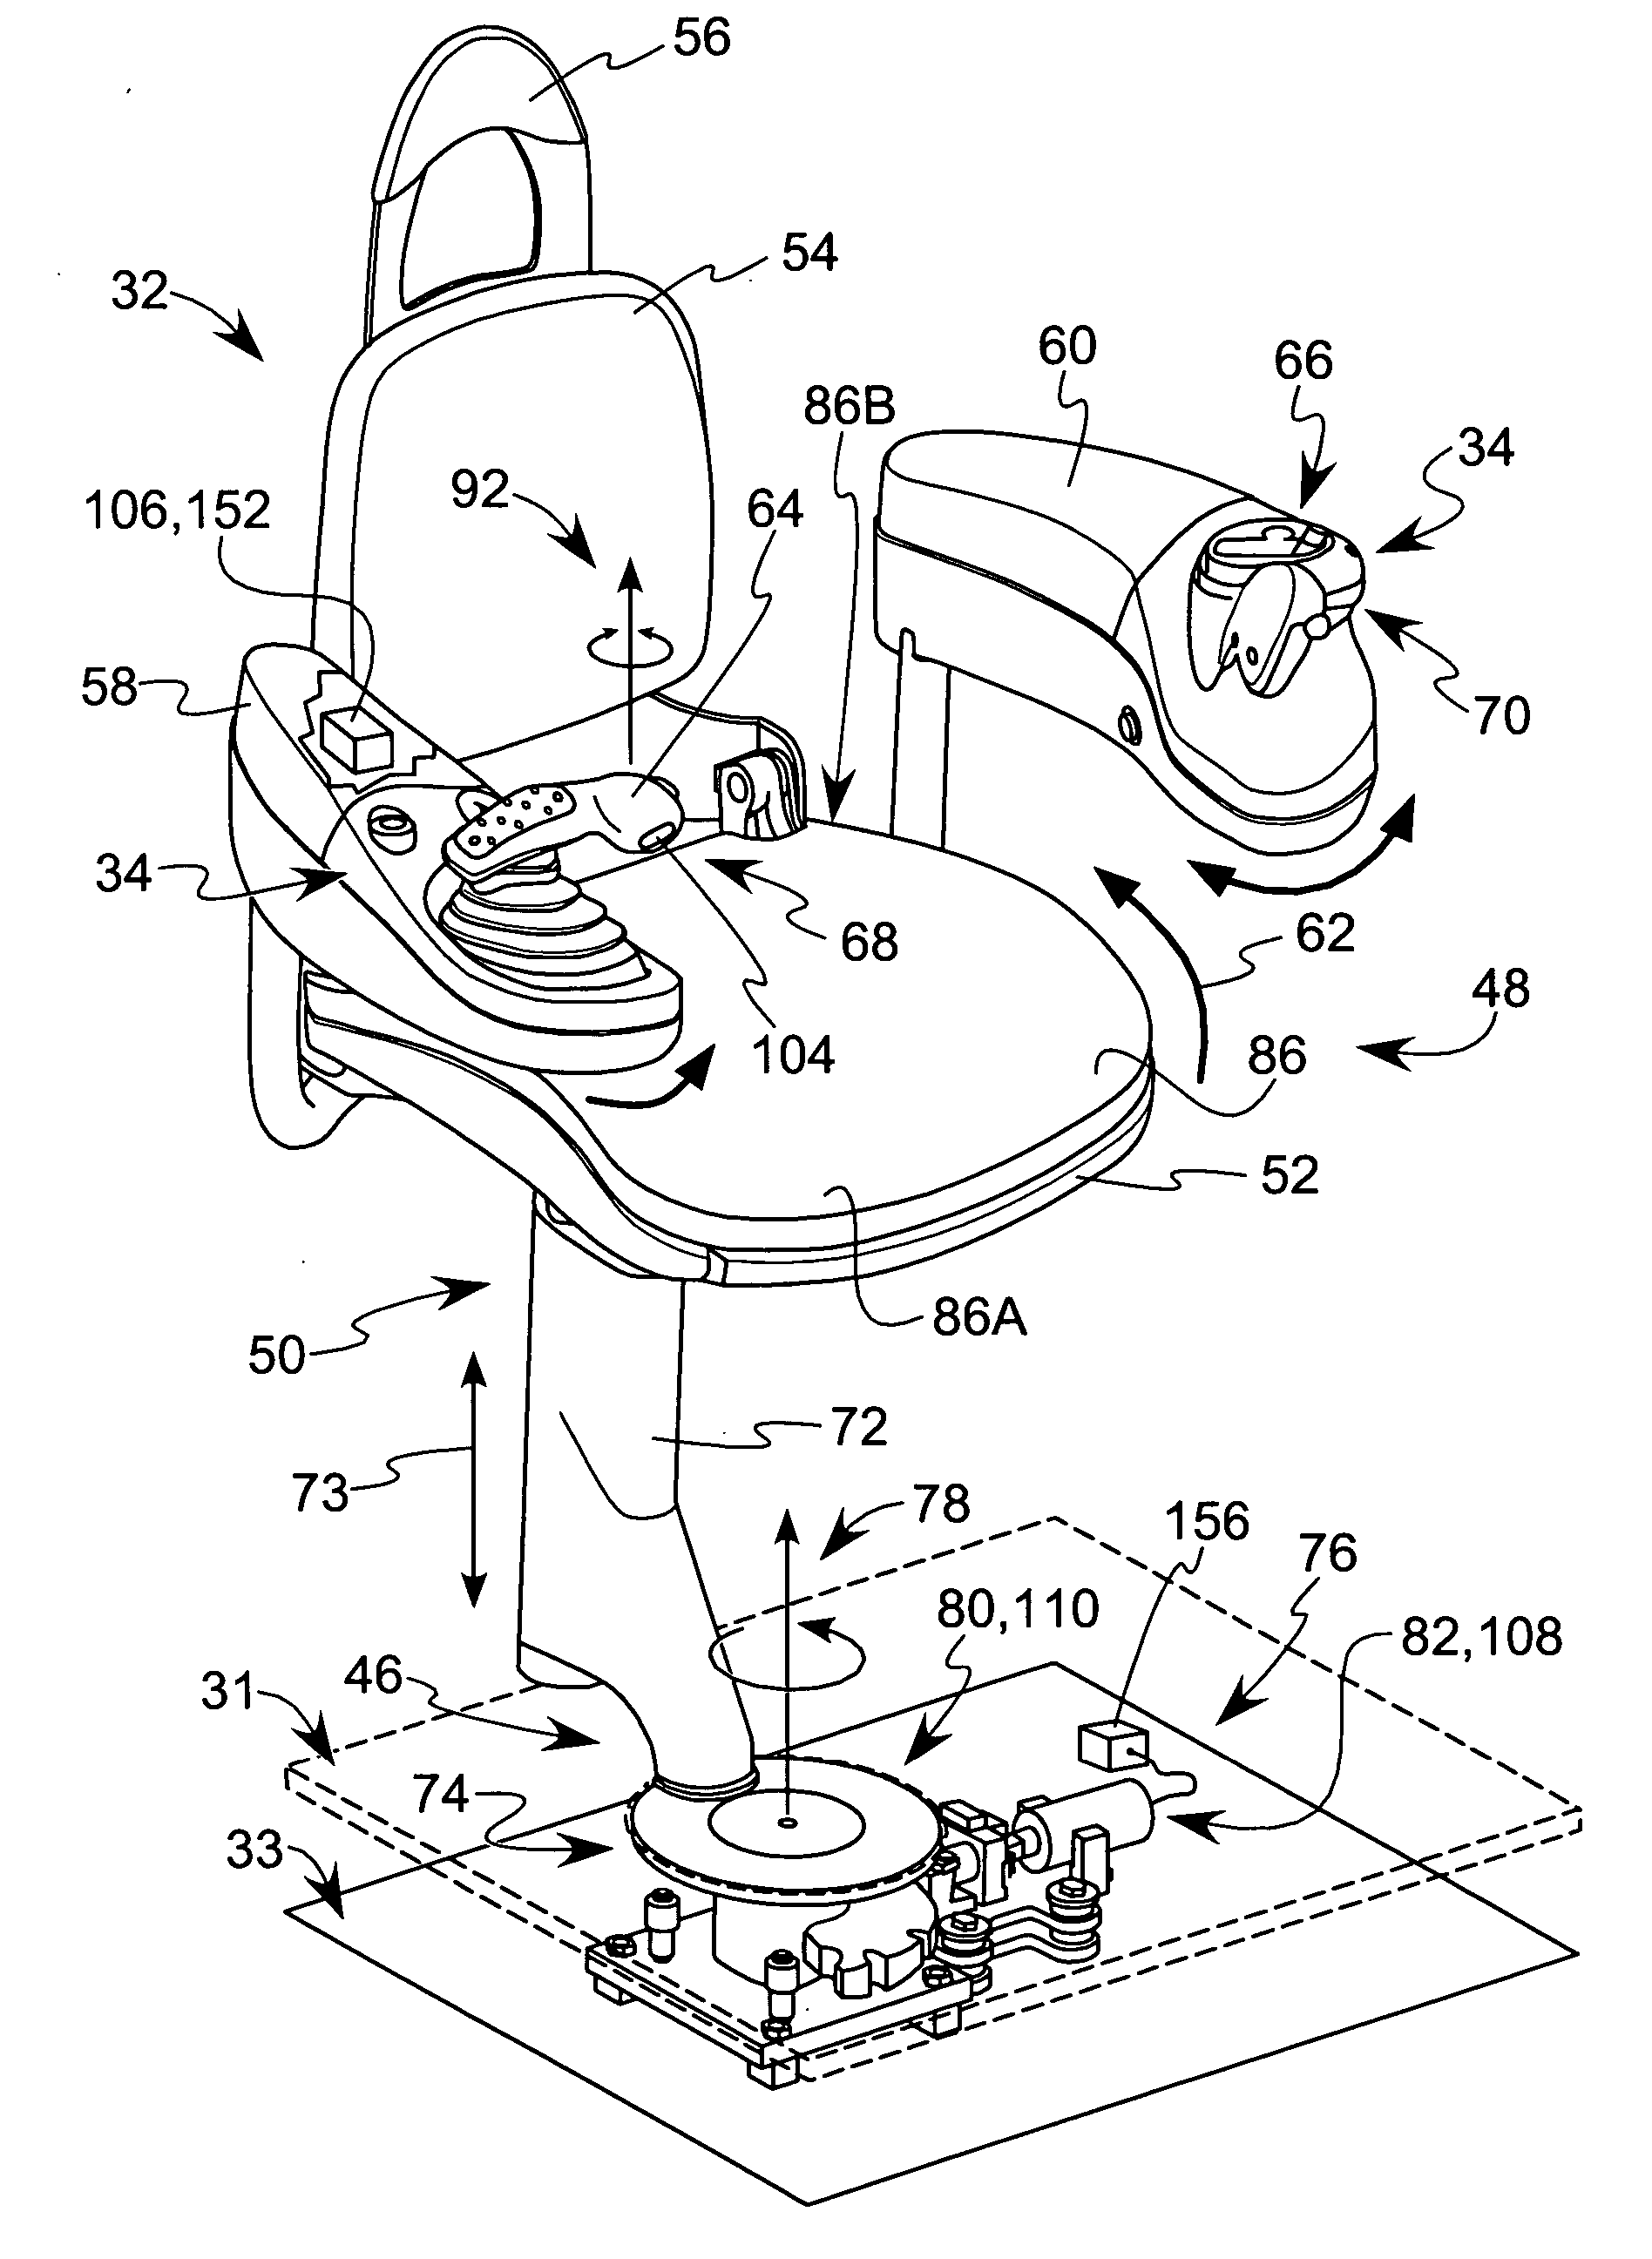 Rotating and swiveling seat